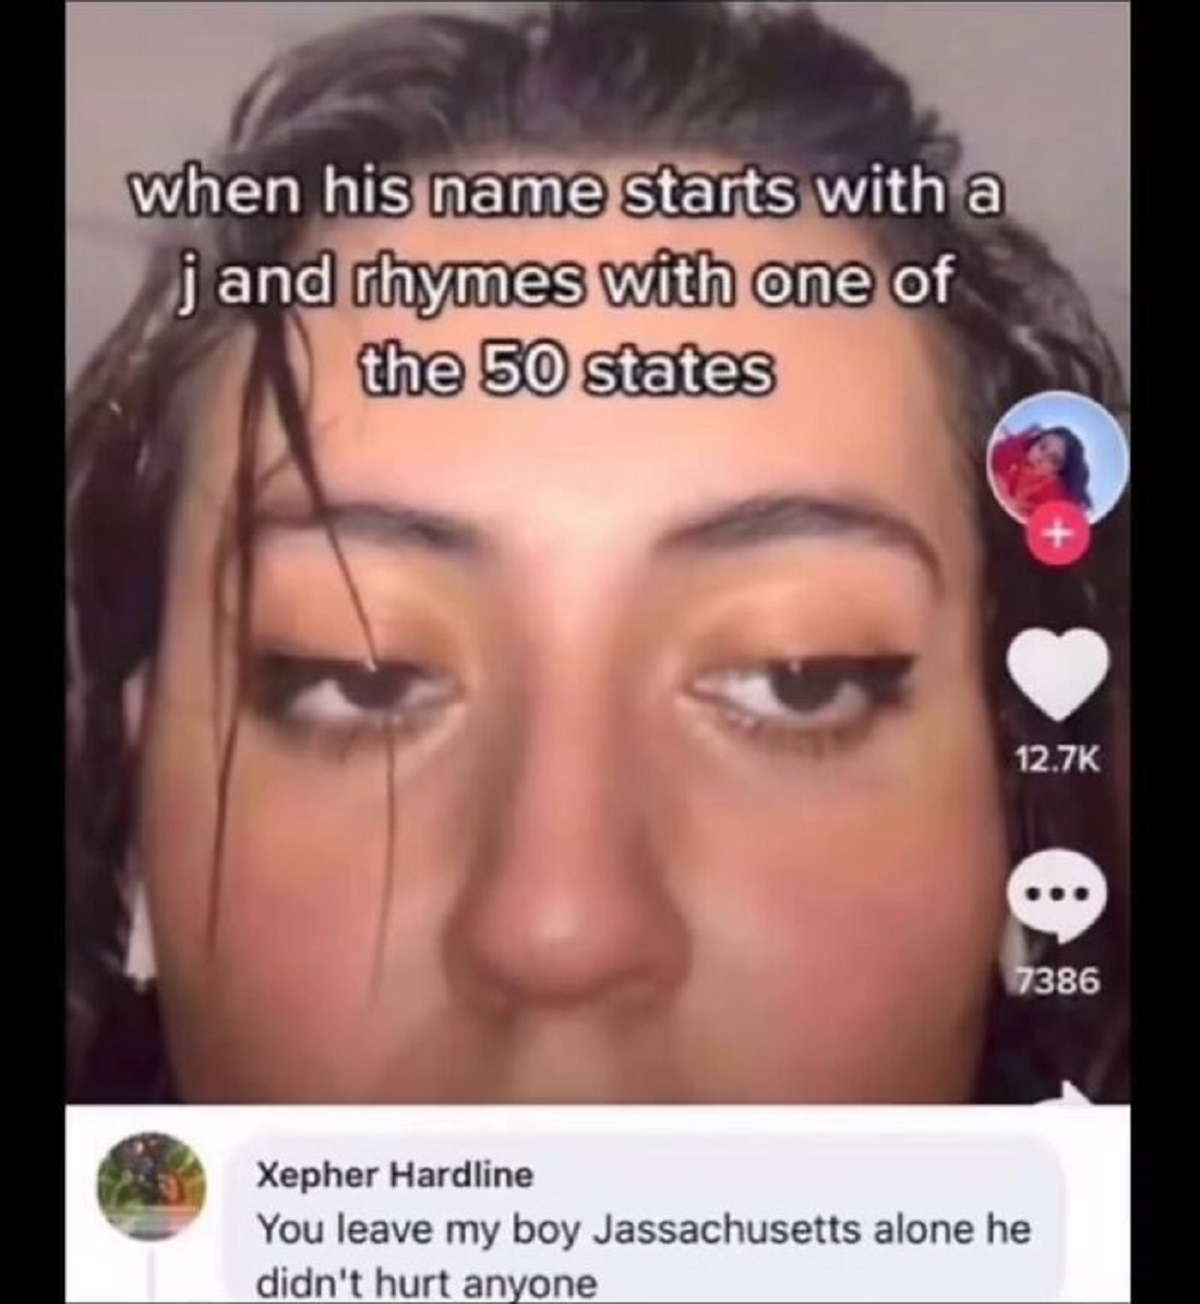 leave my boy jassachusetts alone - when his name starts with a j and rhymes with one of the 50 states 7386 Xepher Hardline You leave my boy Jassachusetts alone he didn't hurt anyone